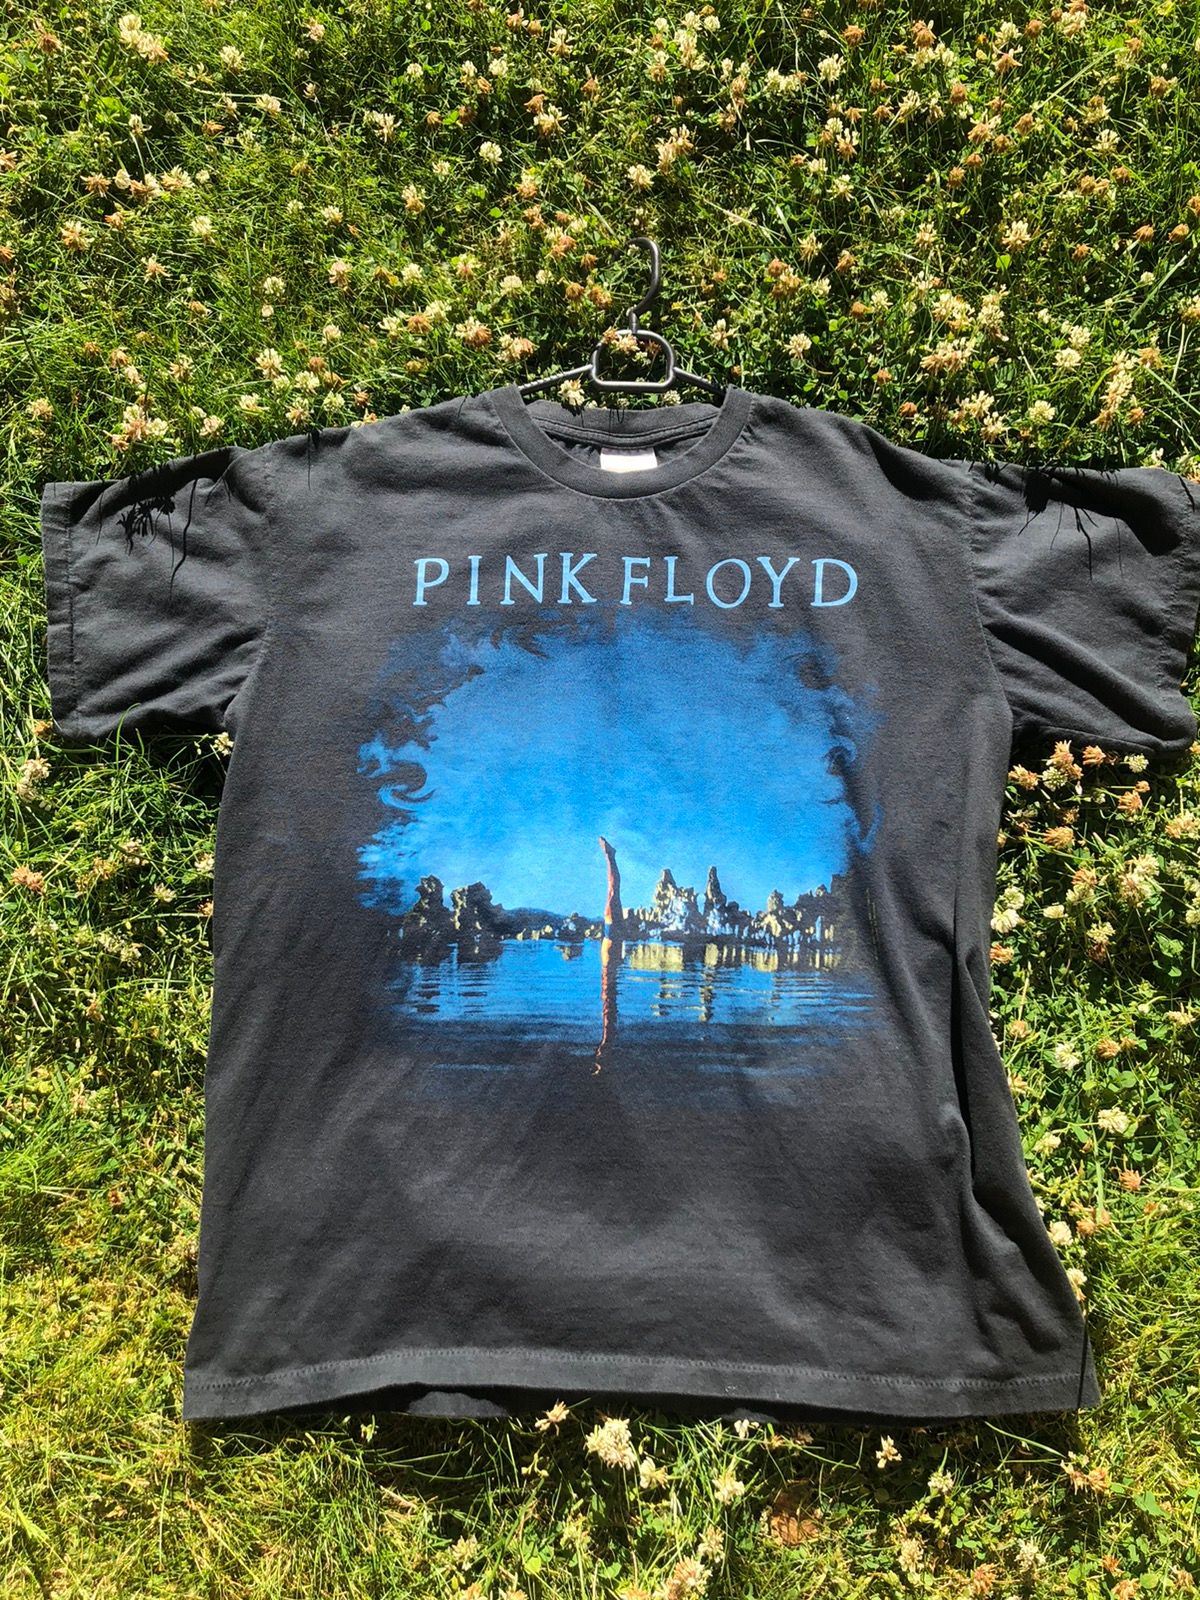 Pink Floyd Vintage 1992 Pink “Floyd Wish You Were Here” Tee Size US M / EU 48-50 / 2 - 1 Preview